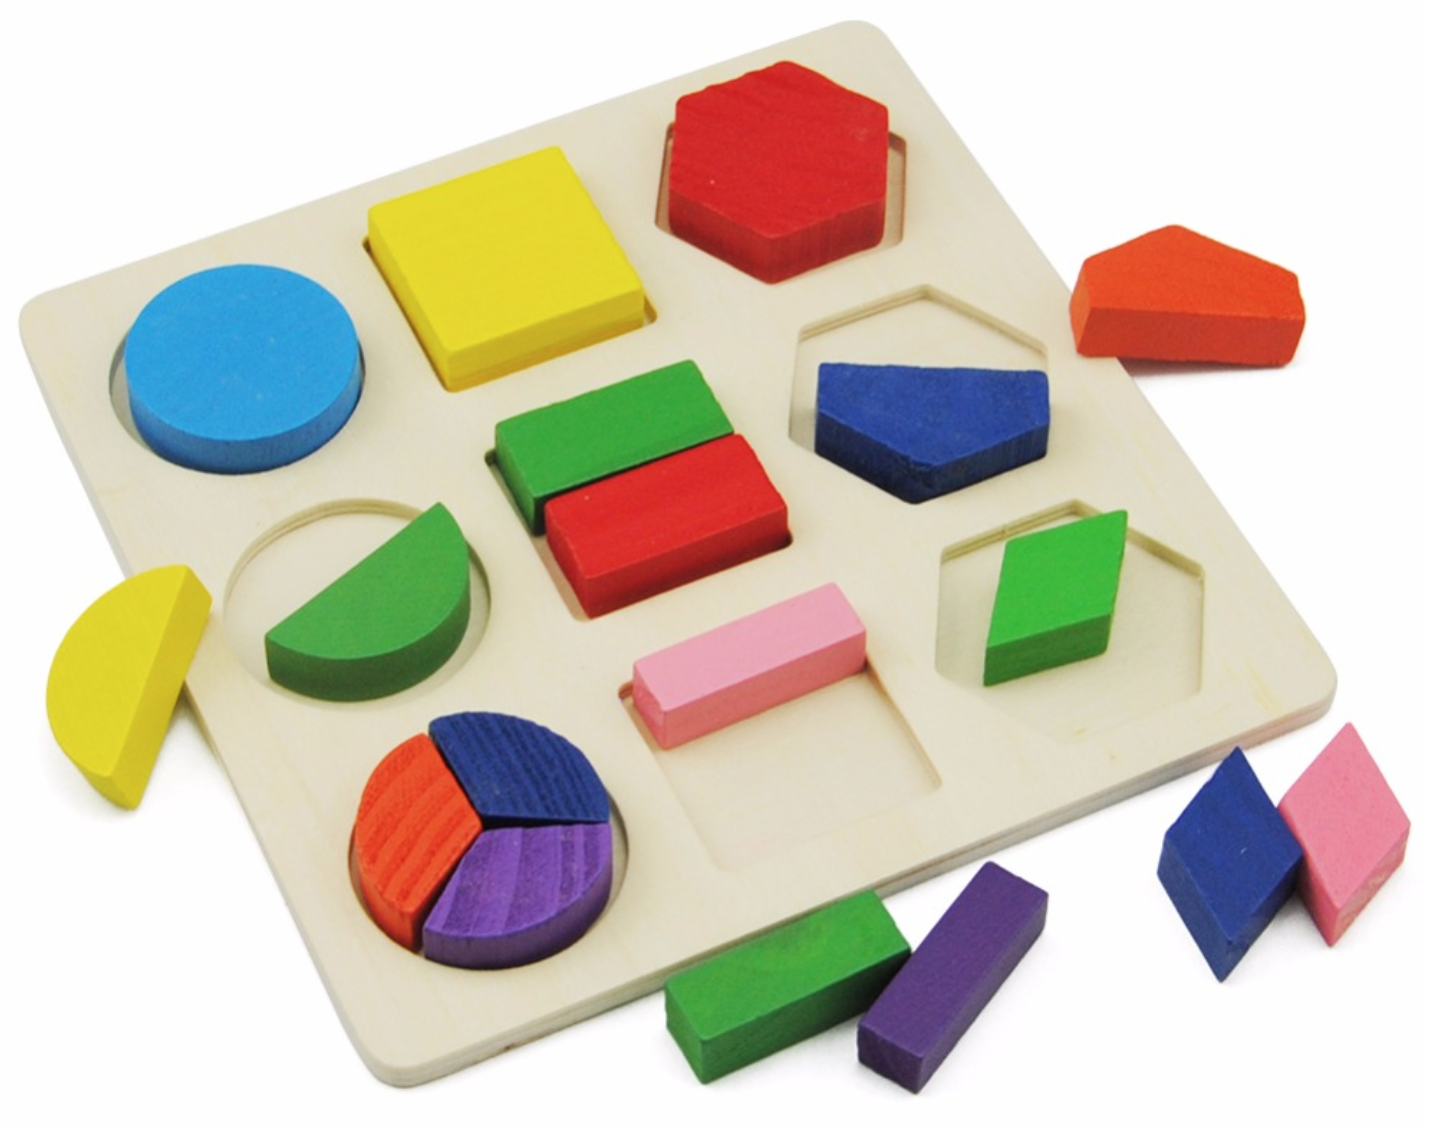 Learning colors, shapes and fractions